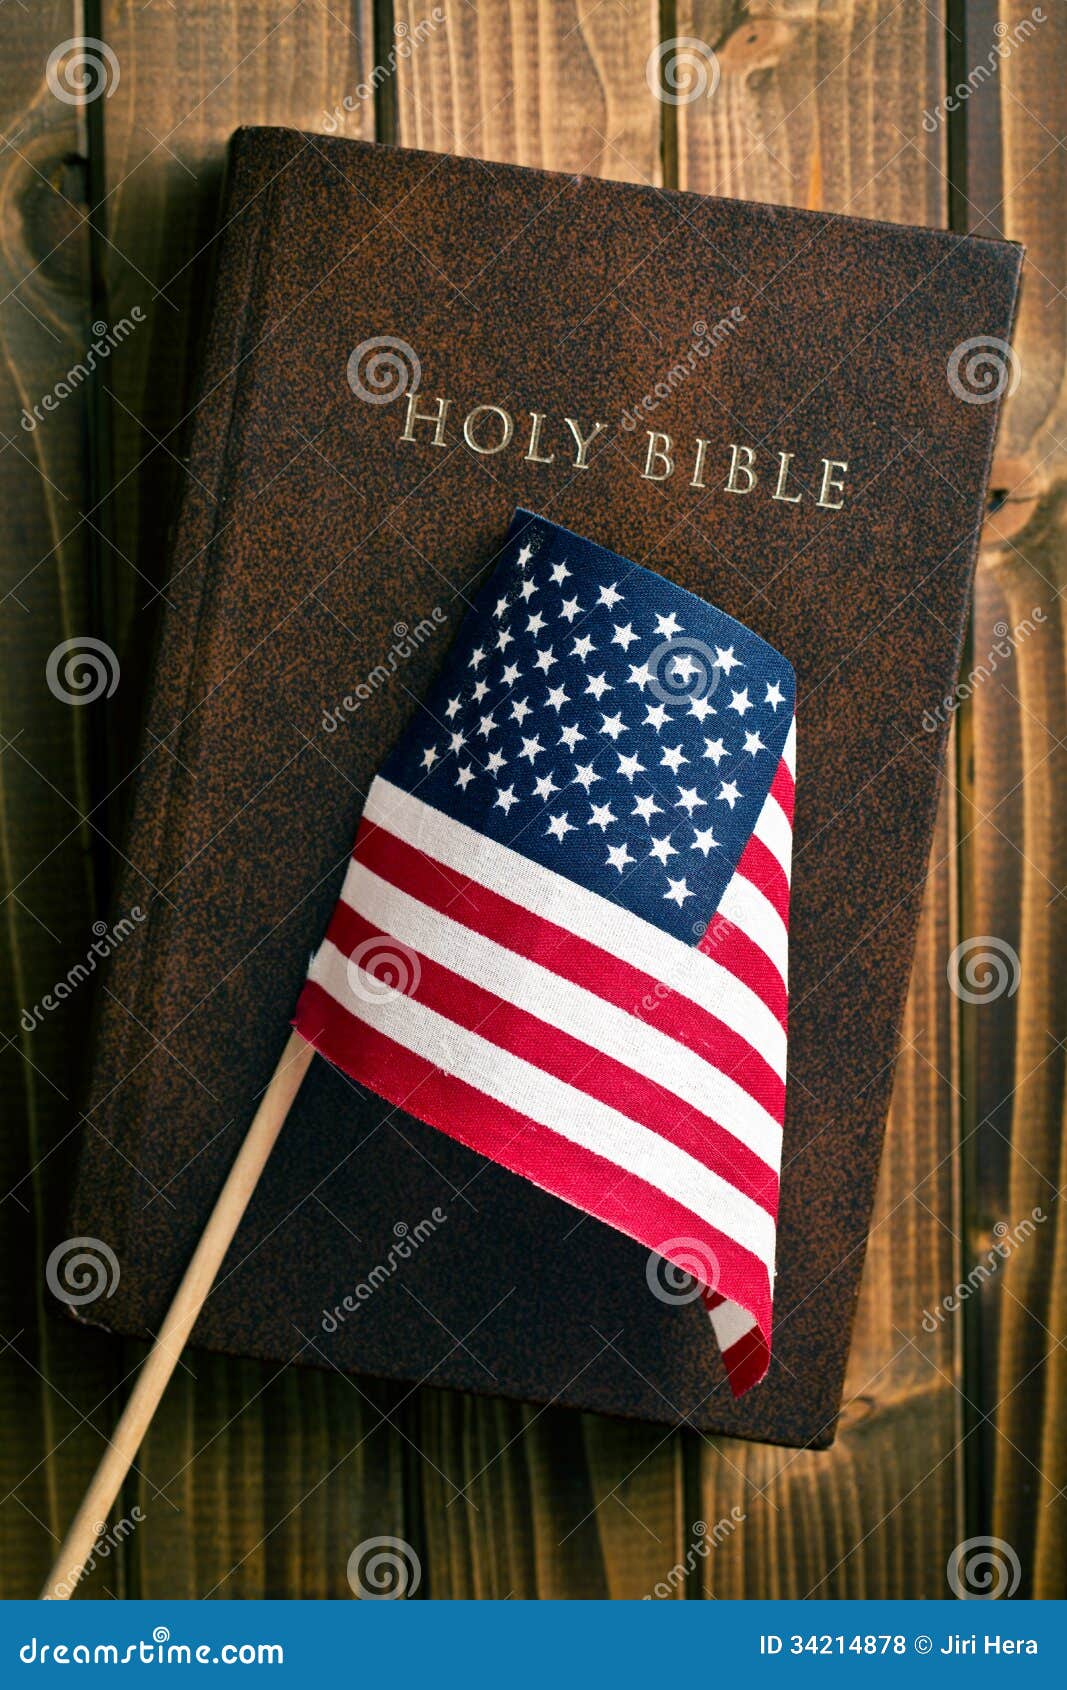 Holy Bible With American Flag Royalty Free Stock Photos - Image: 34214878